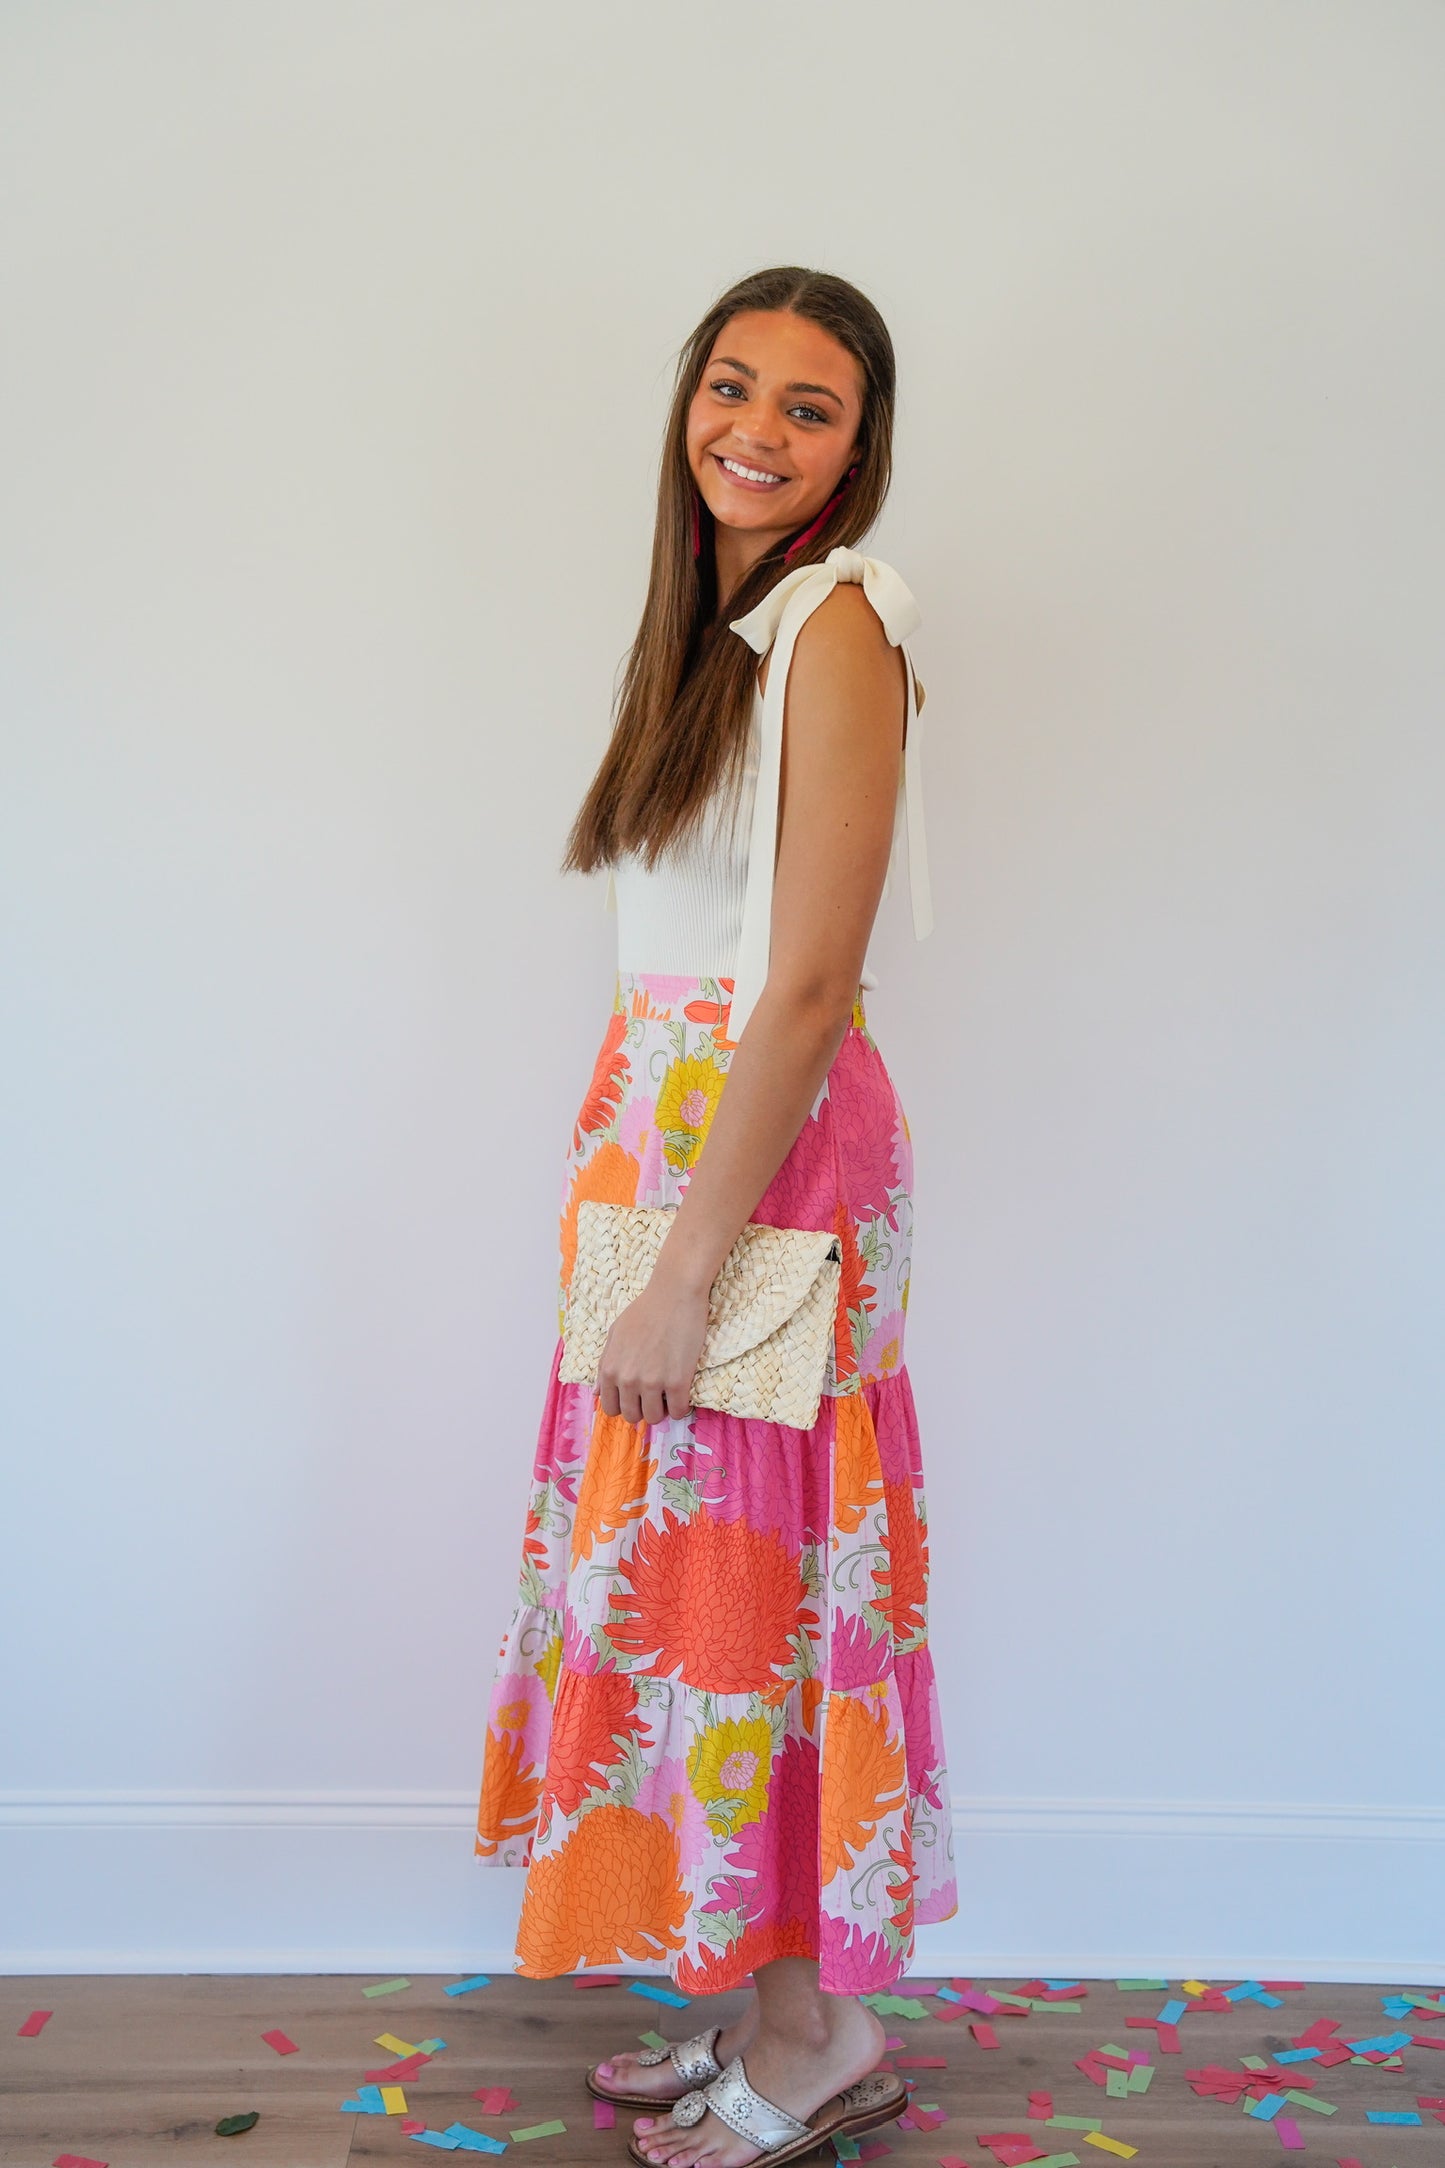 Floral Bunches Skirt